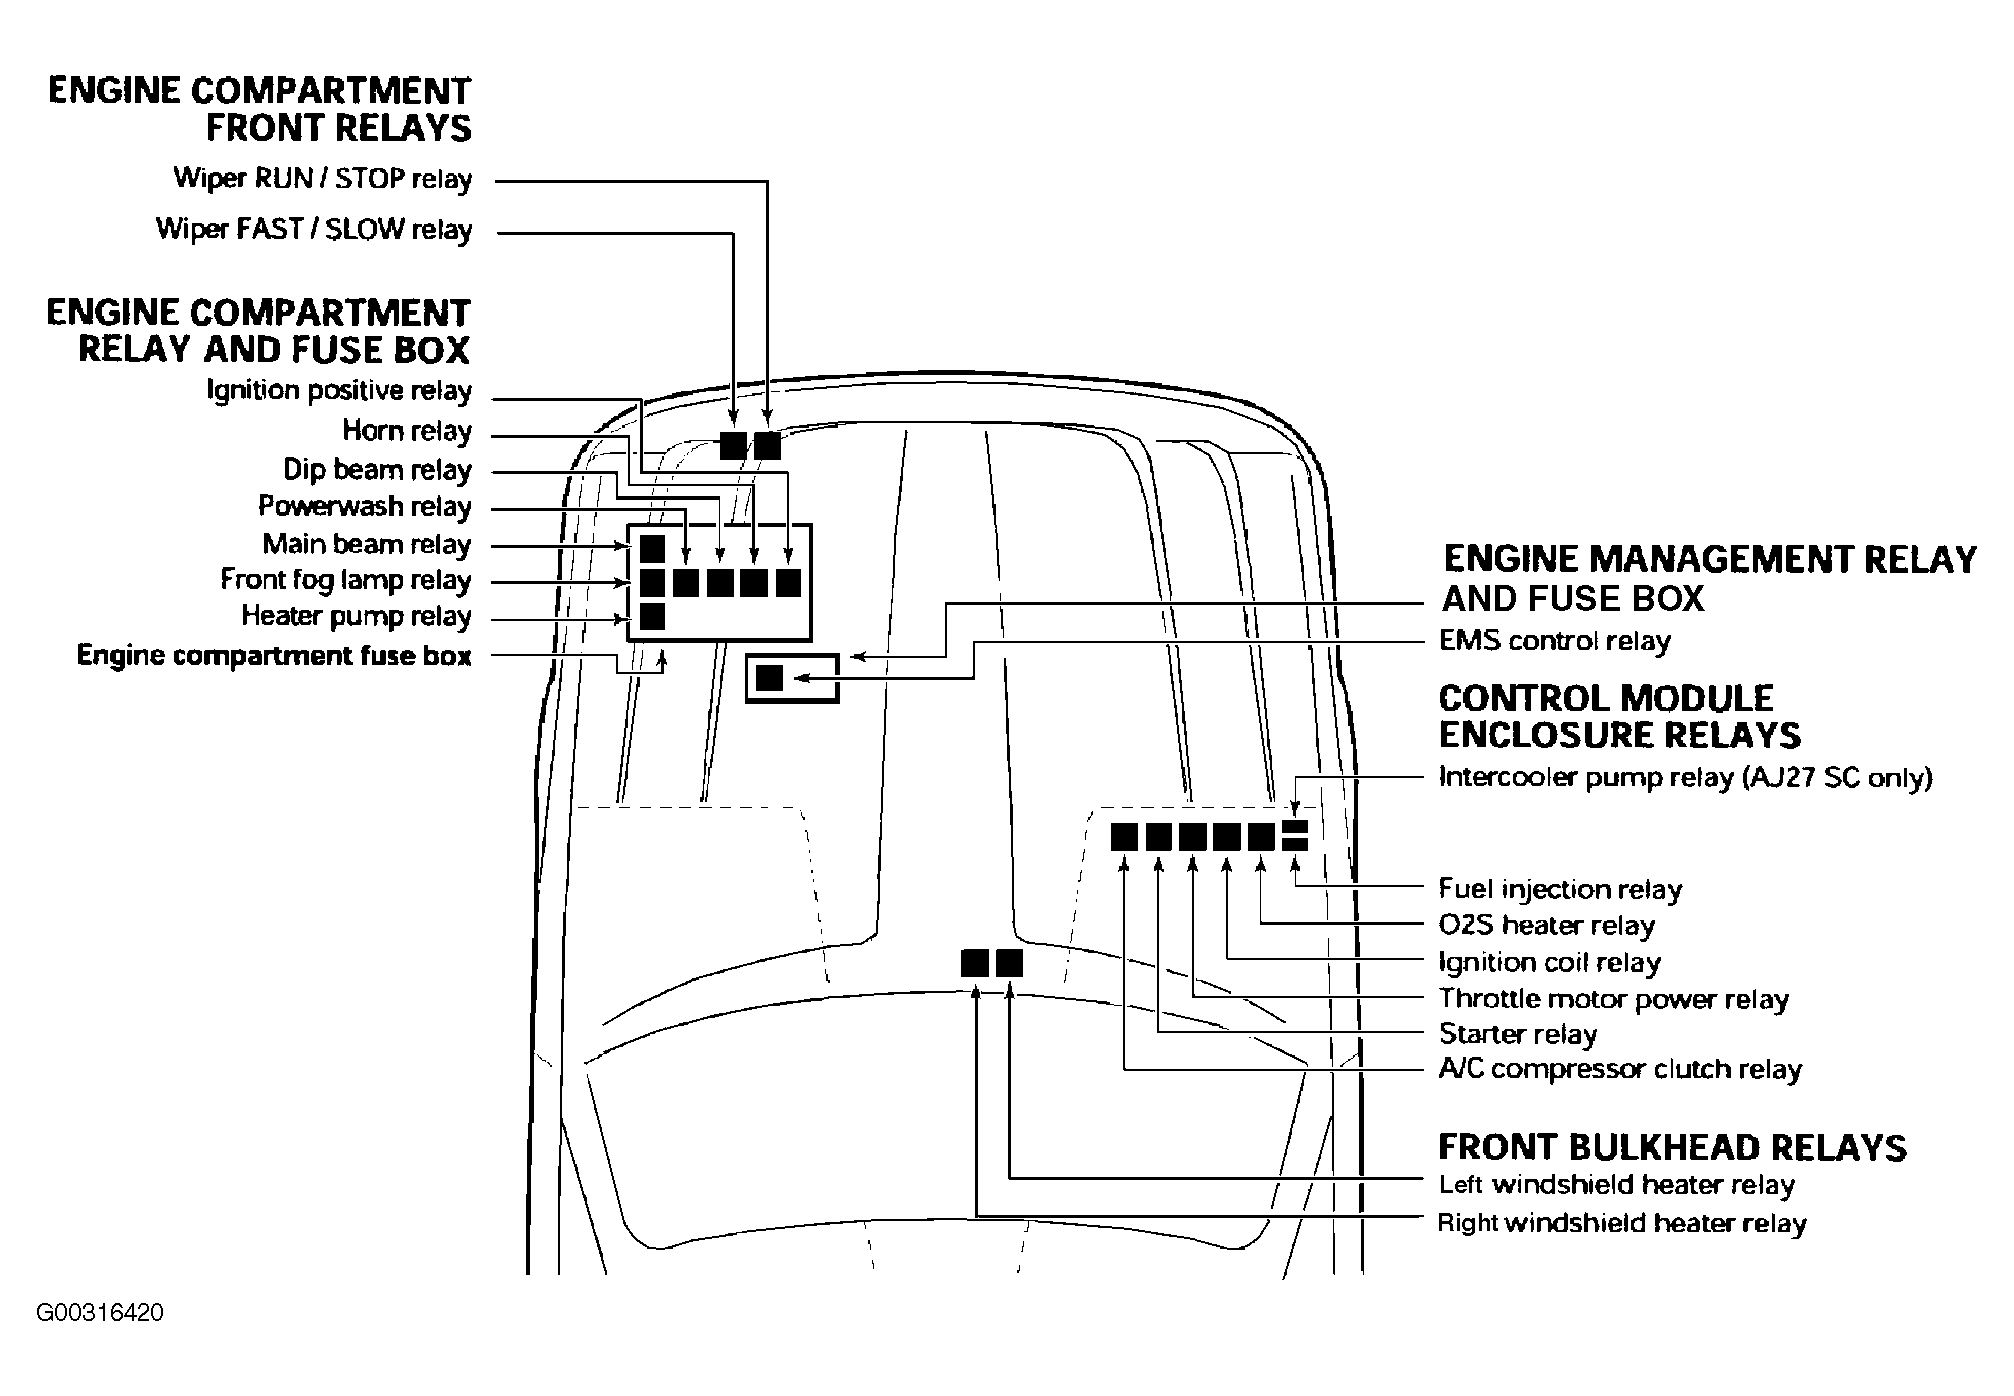 Jaguar XJ Super 2003 - Component Locations -  Identifying Engine Compartment Fuse/Relay Locations